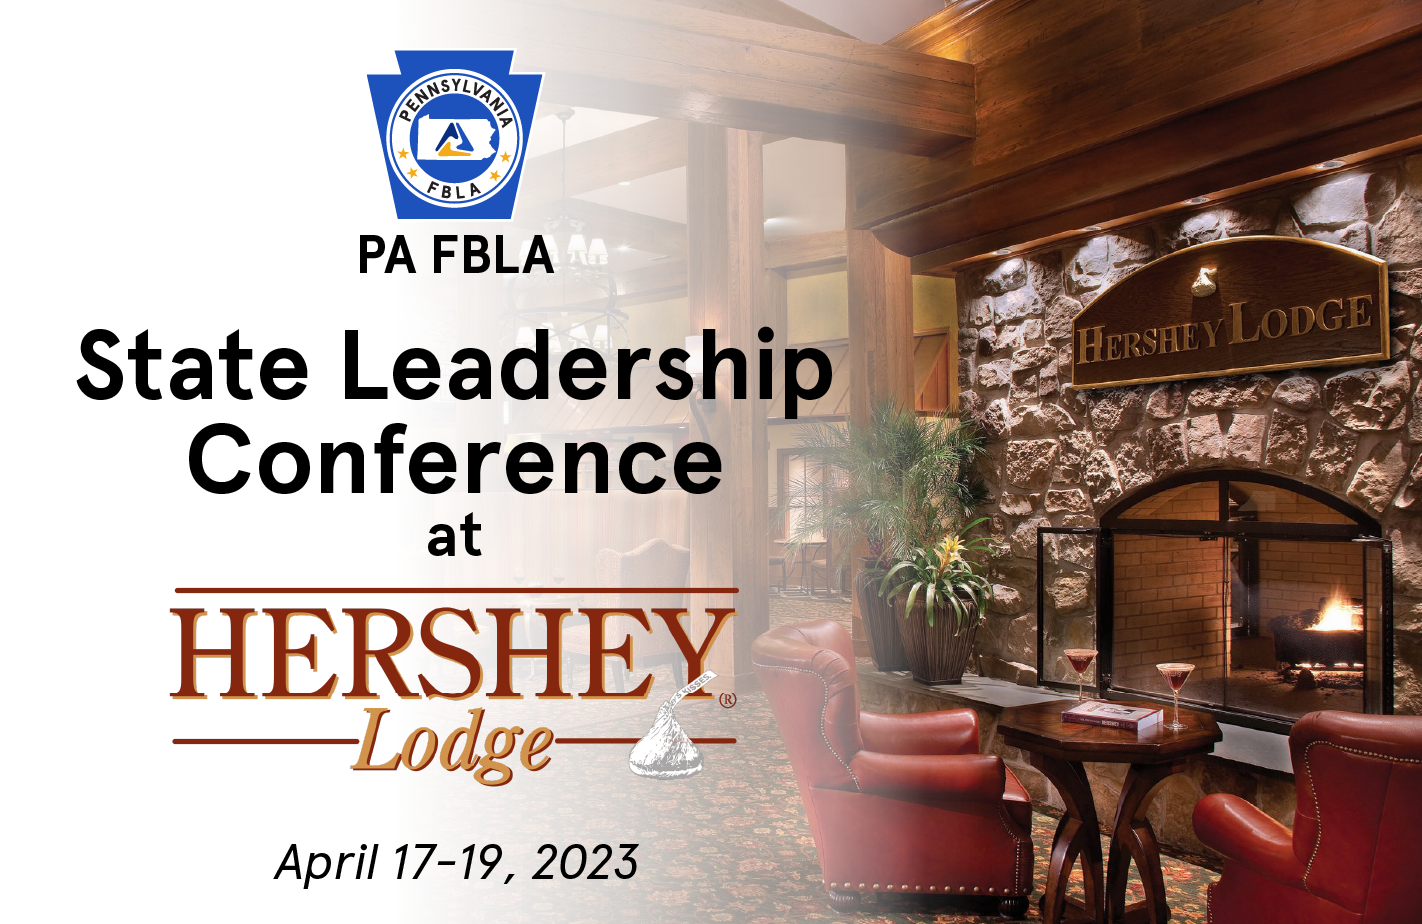 2022-2023 State Leadership Conference Information